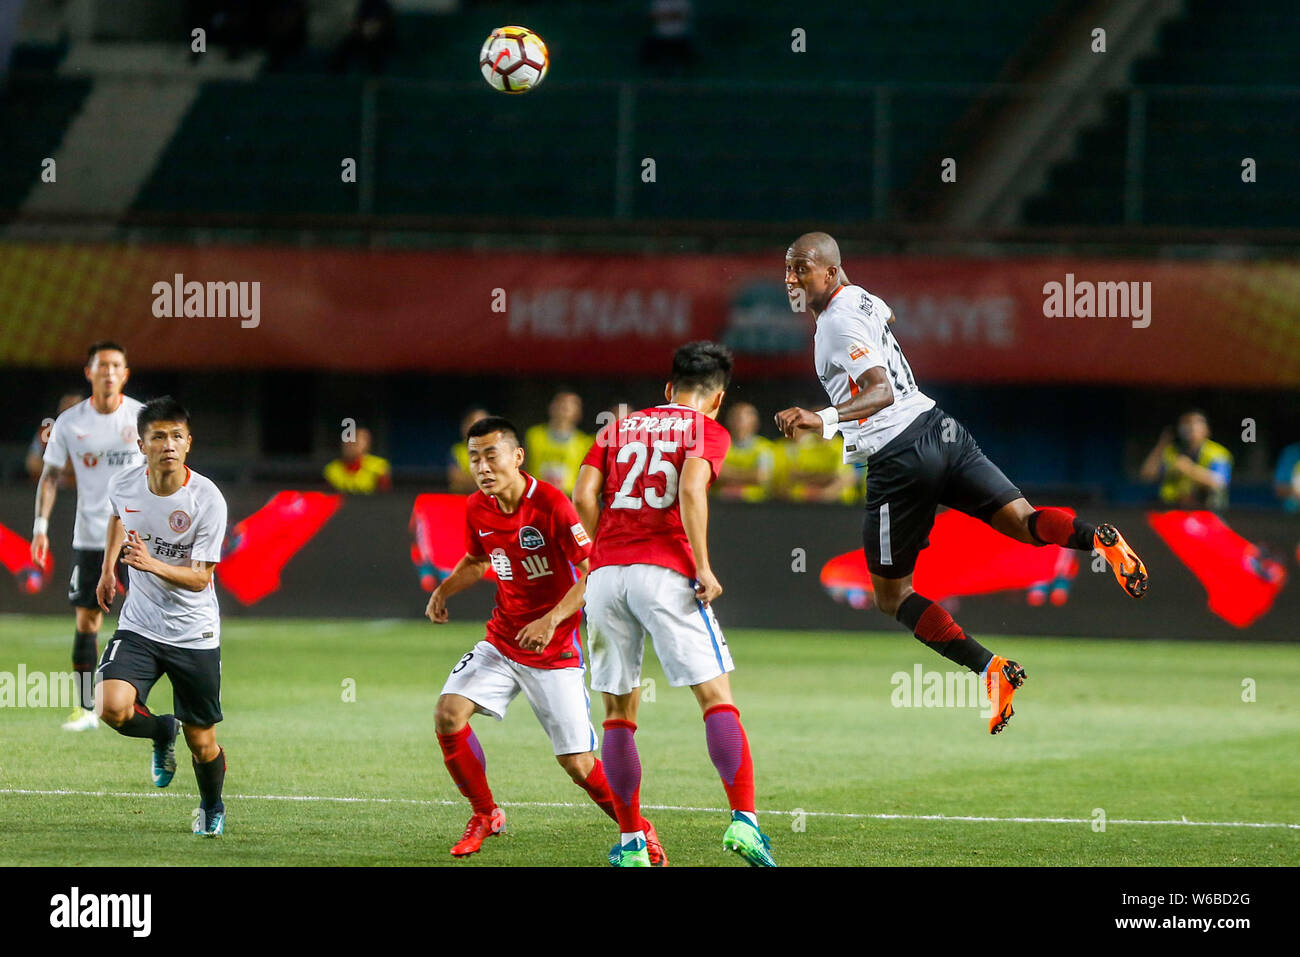 Ecuadorian football player Jaime Ayovi, top, of Beijing Renhe heads the ball to make a pass against players of Henan Jianye in their 10th round match Stock Photo